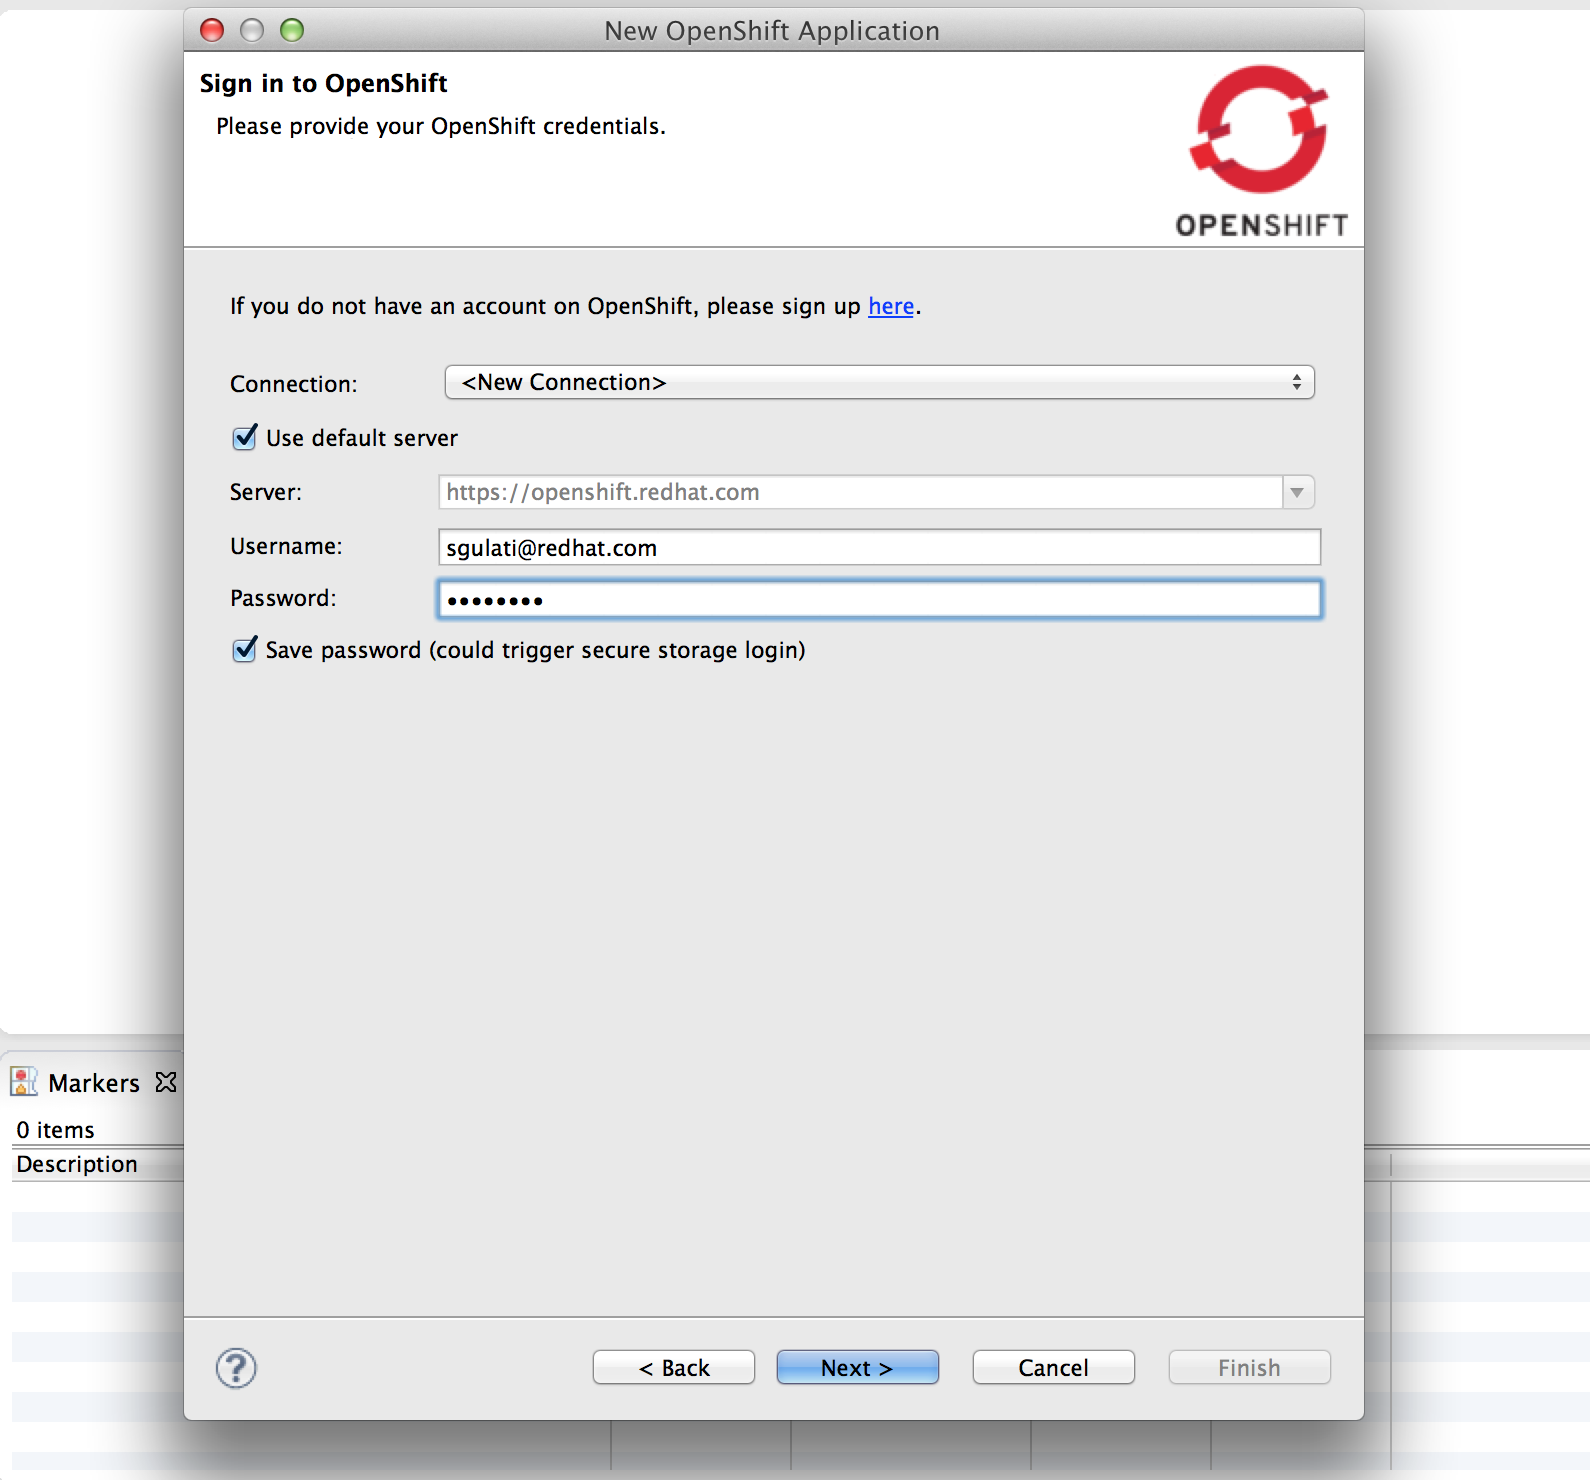 Sign in to OpenShift